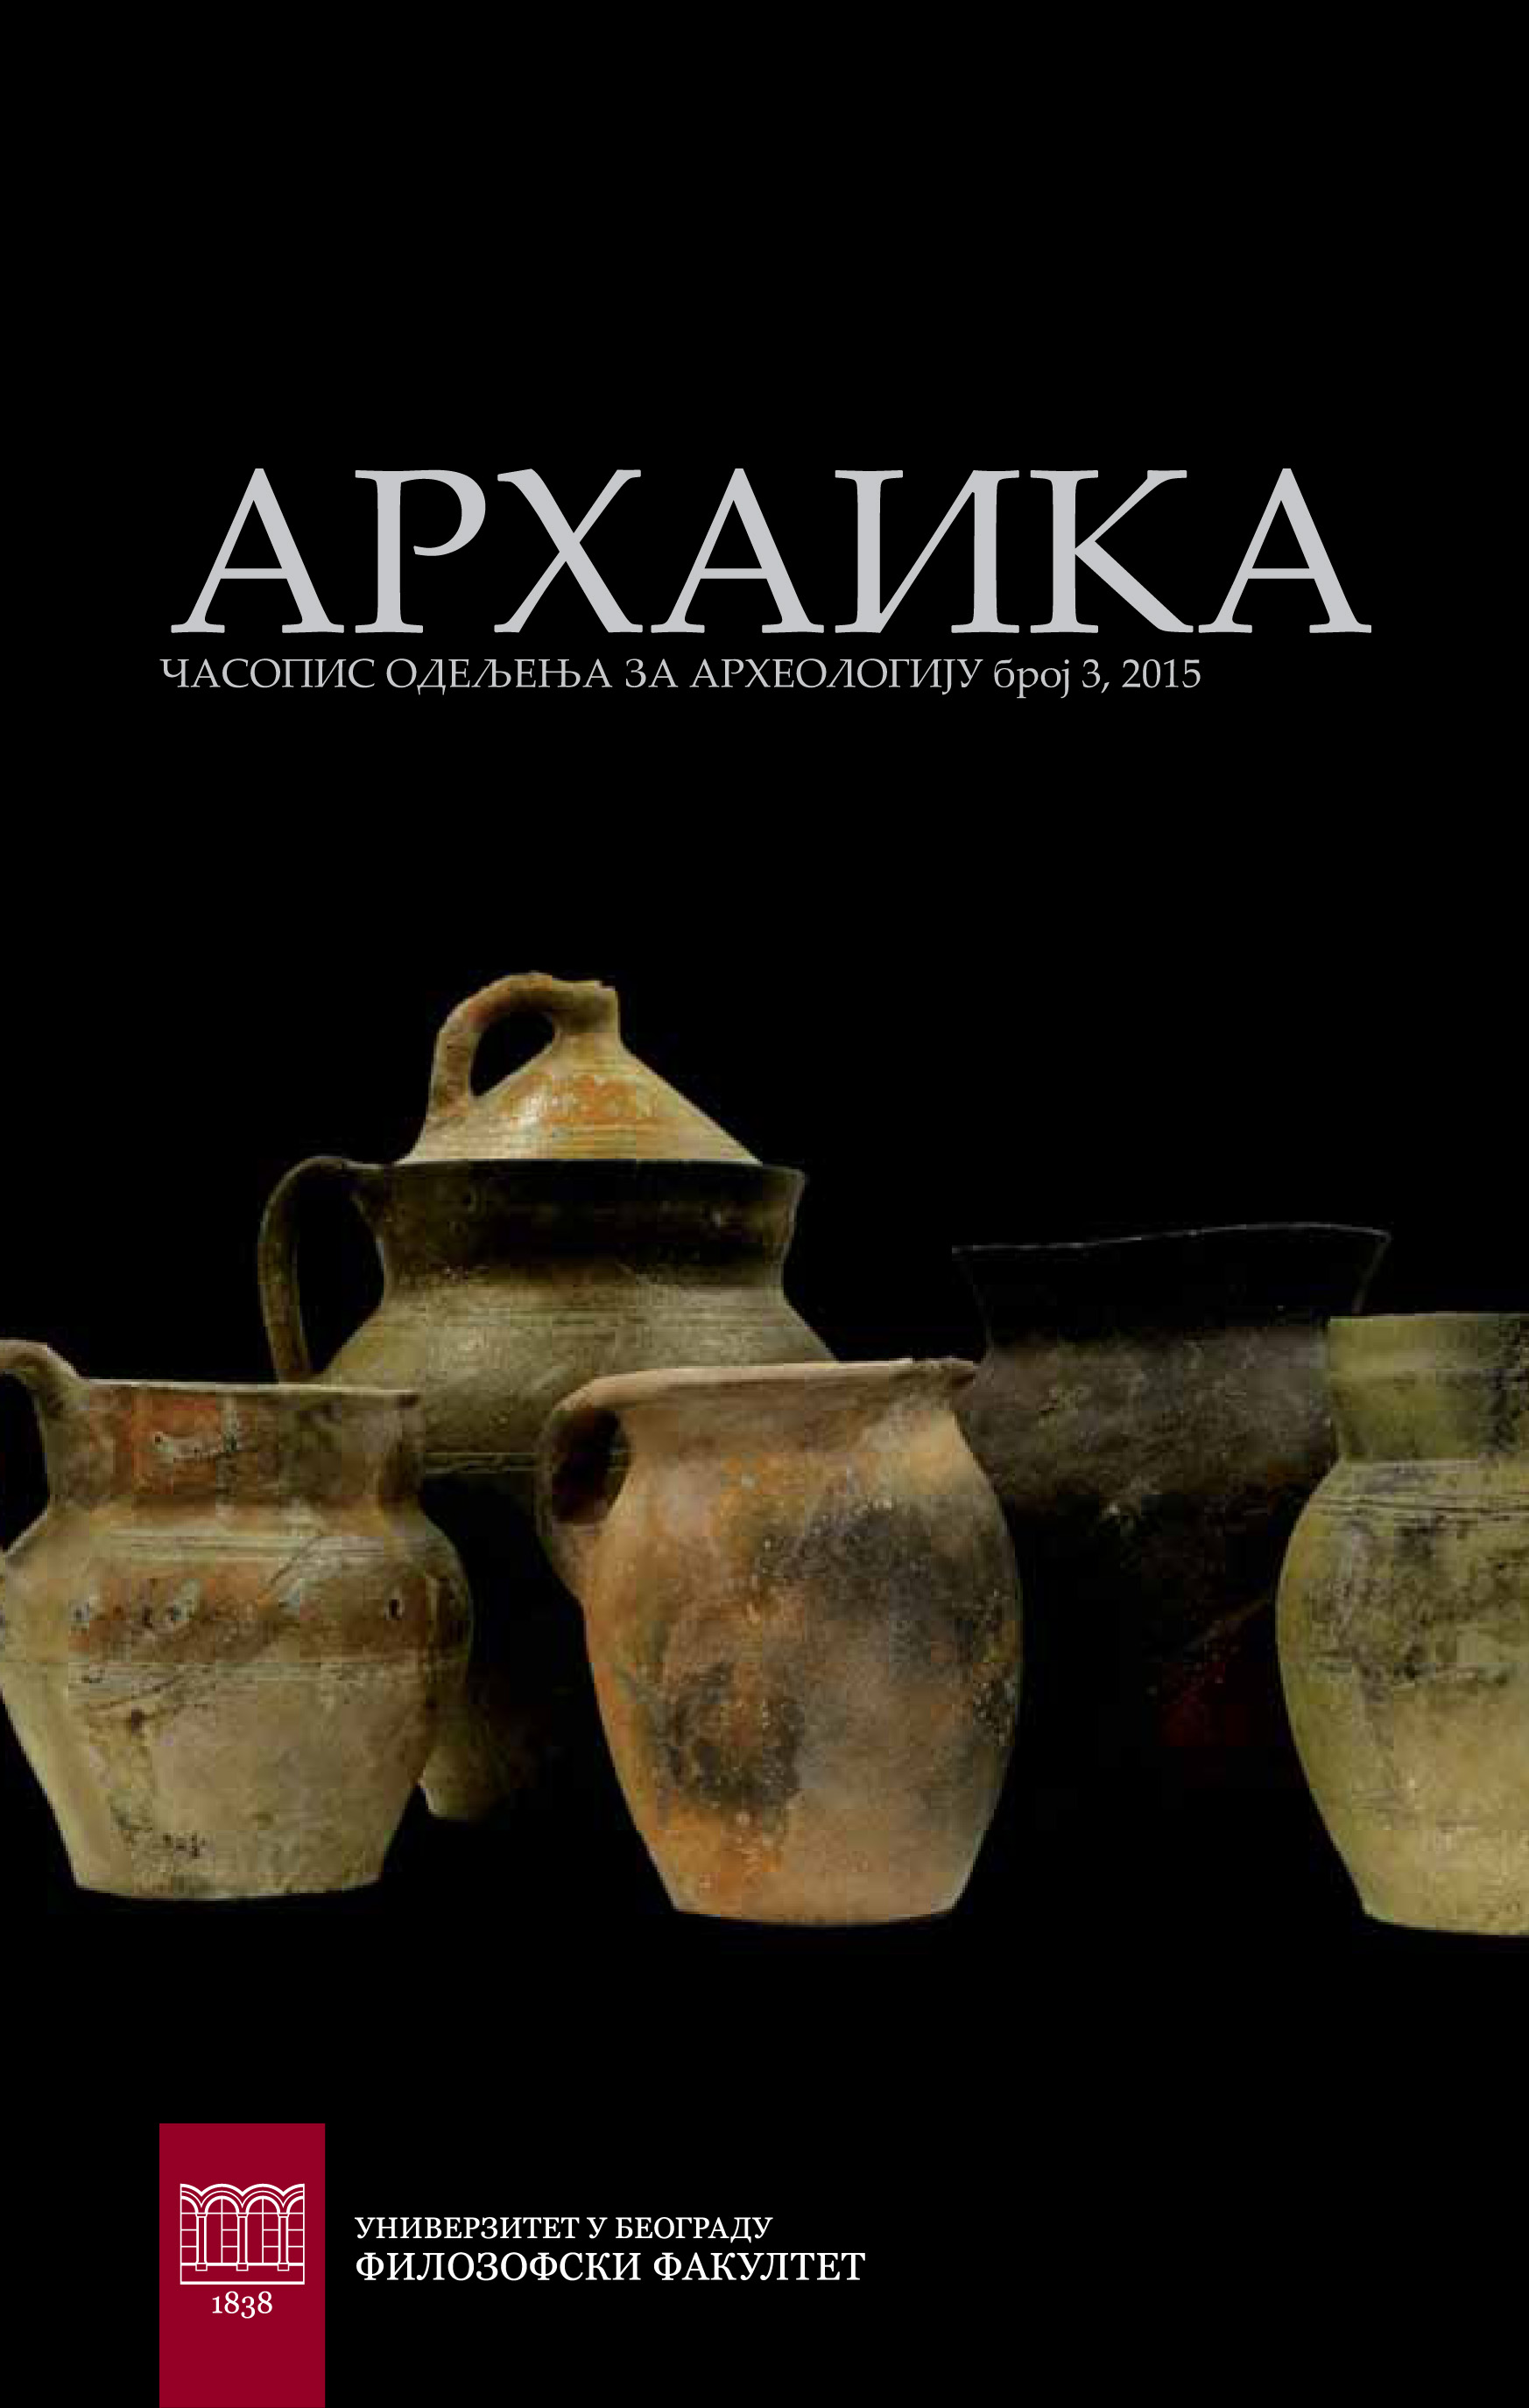 Medieval settlements in the Light of Archaeological Sources. 2nd International Conference of Medieval archaeology. Zagreb: Institute of Archaeology, 2-3.6.2015. Cover Image